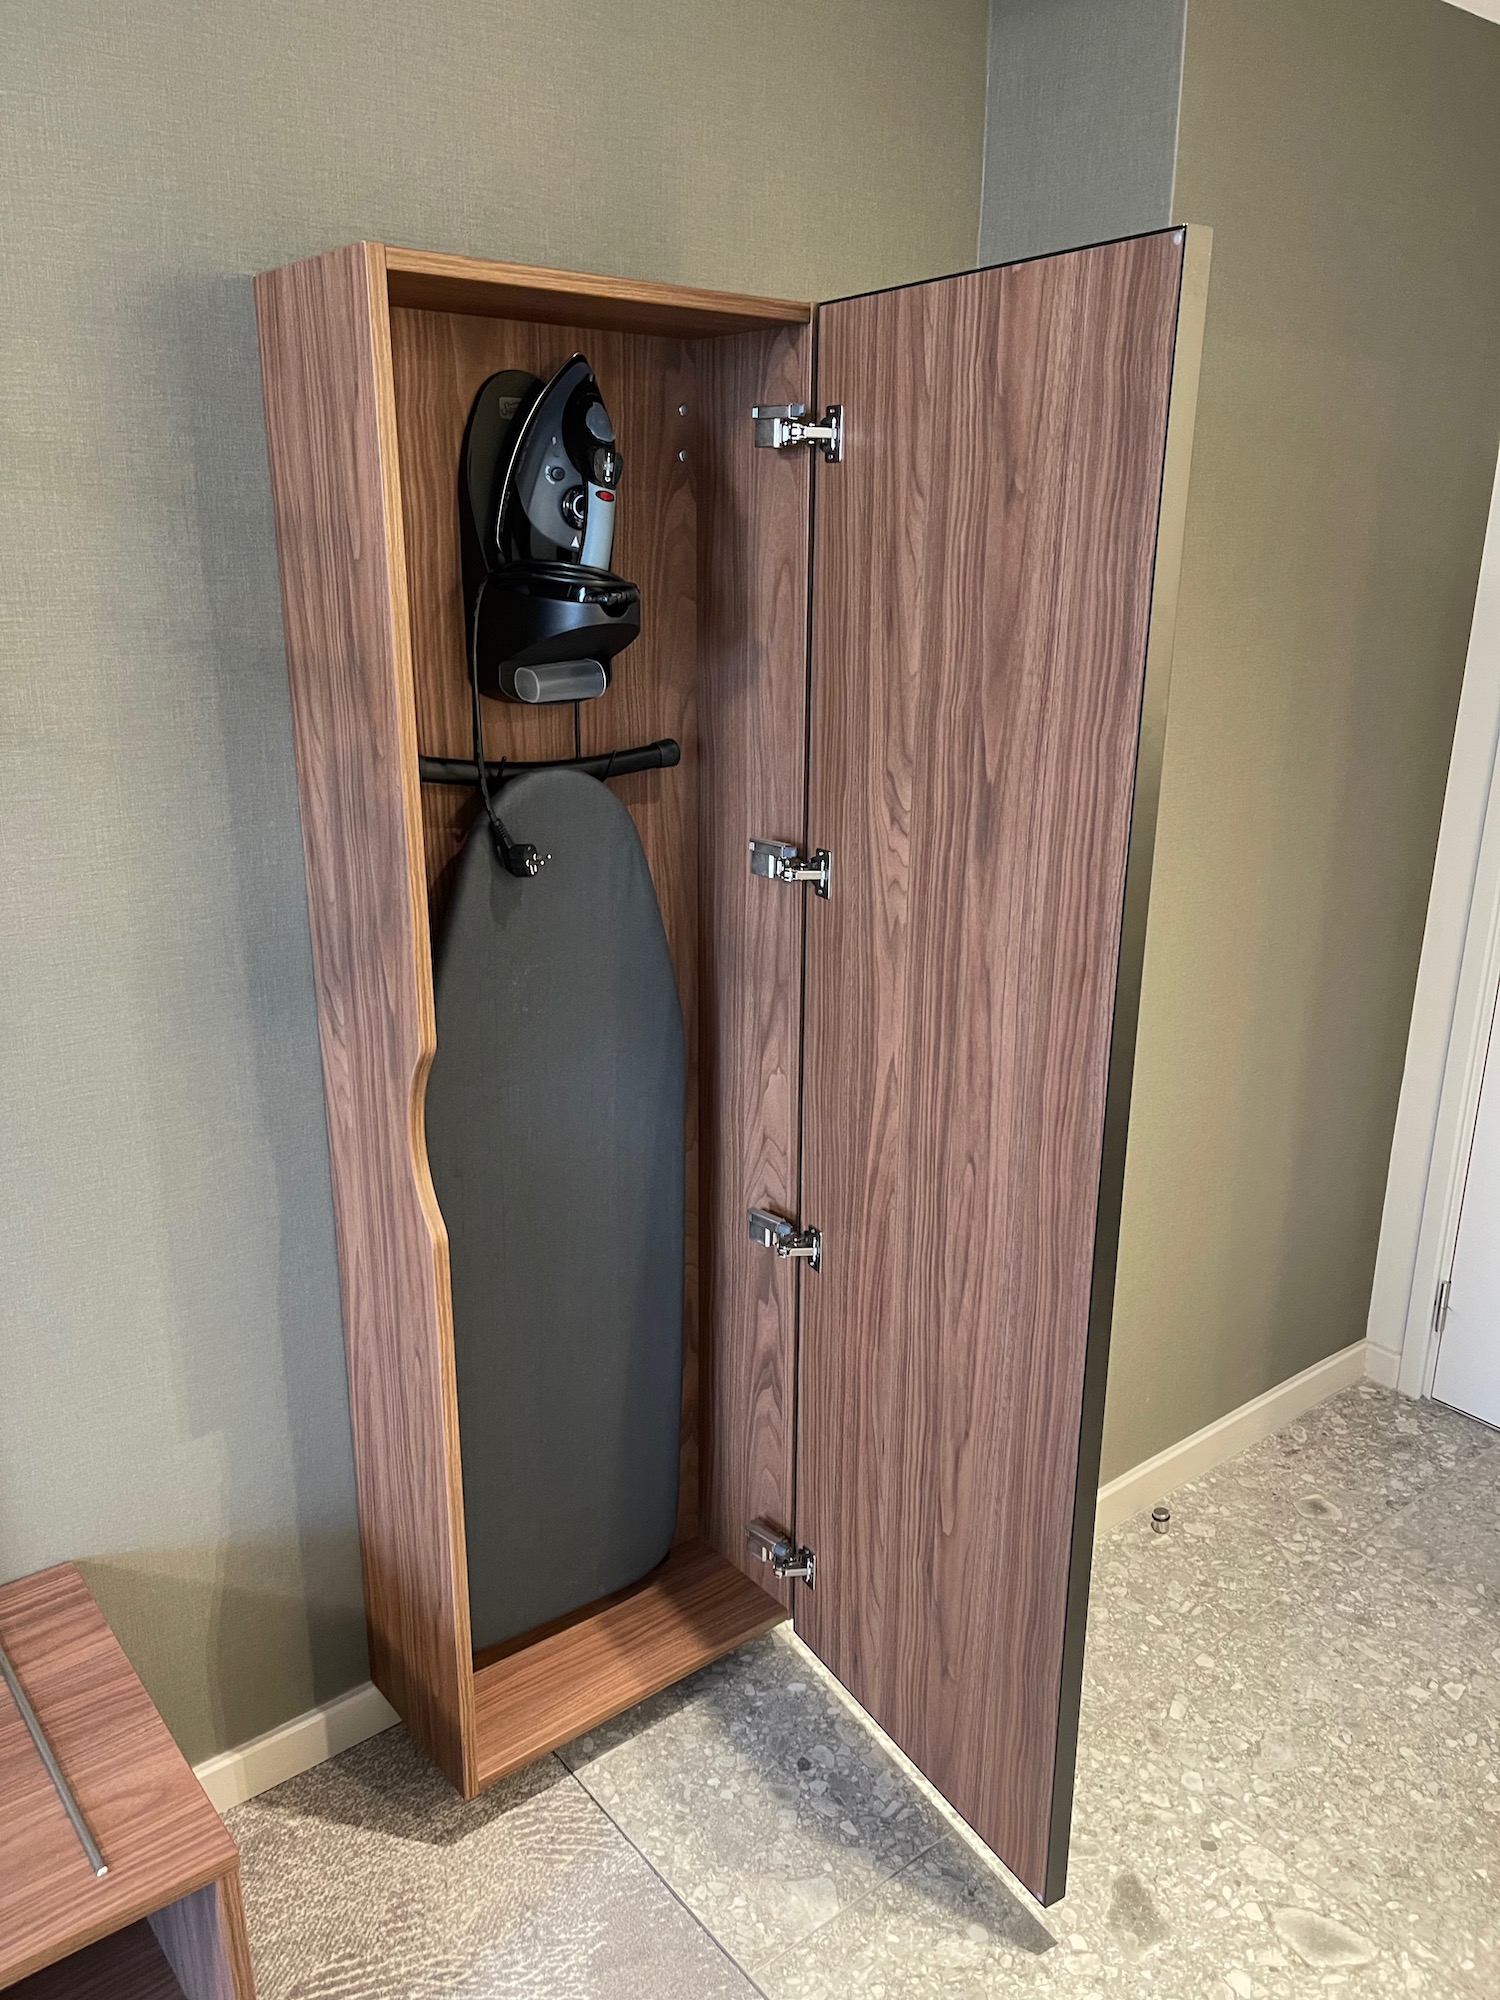 a wooden cabinet with a surfboard inside